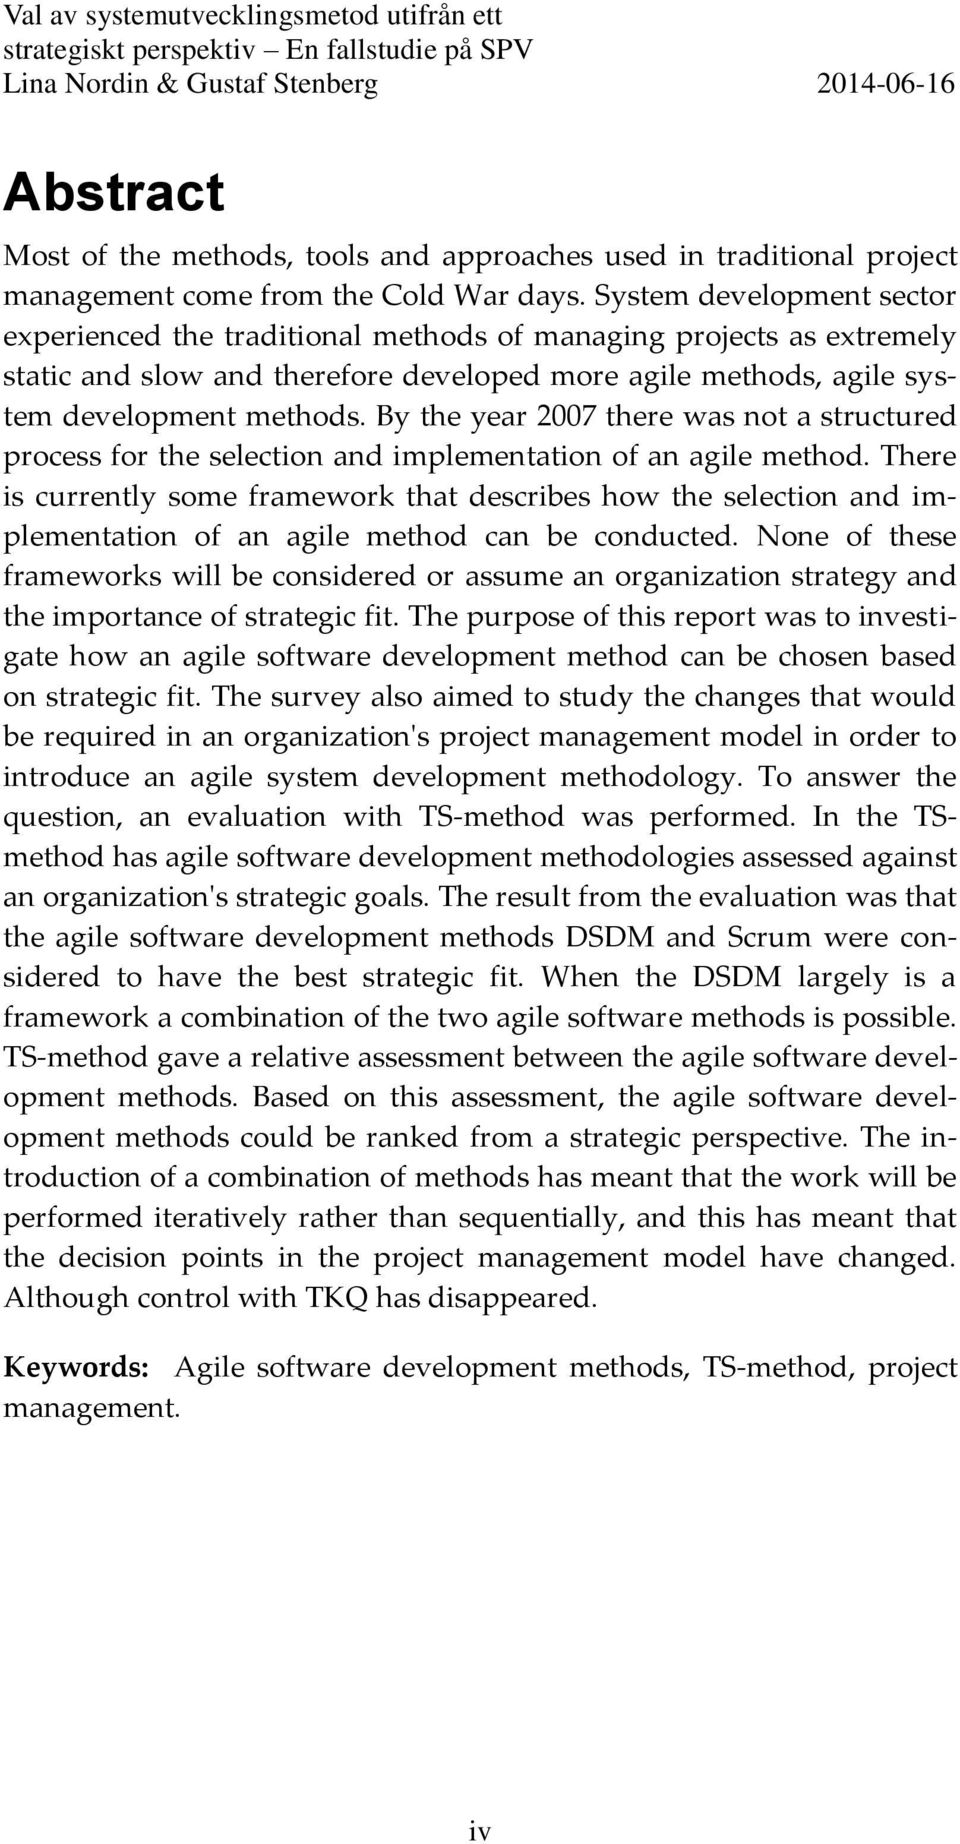 By the year 2007 there was not a structured process for the selection and implementation of an agile method.